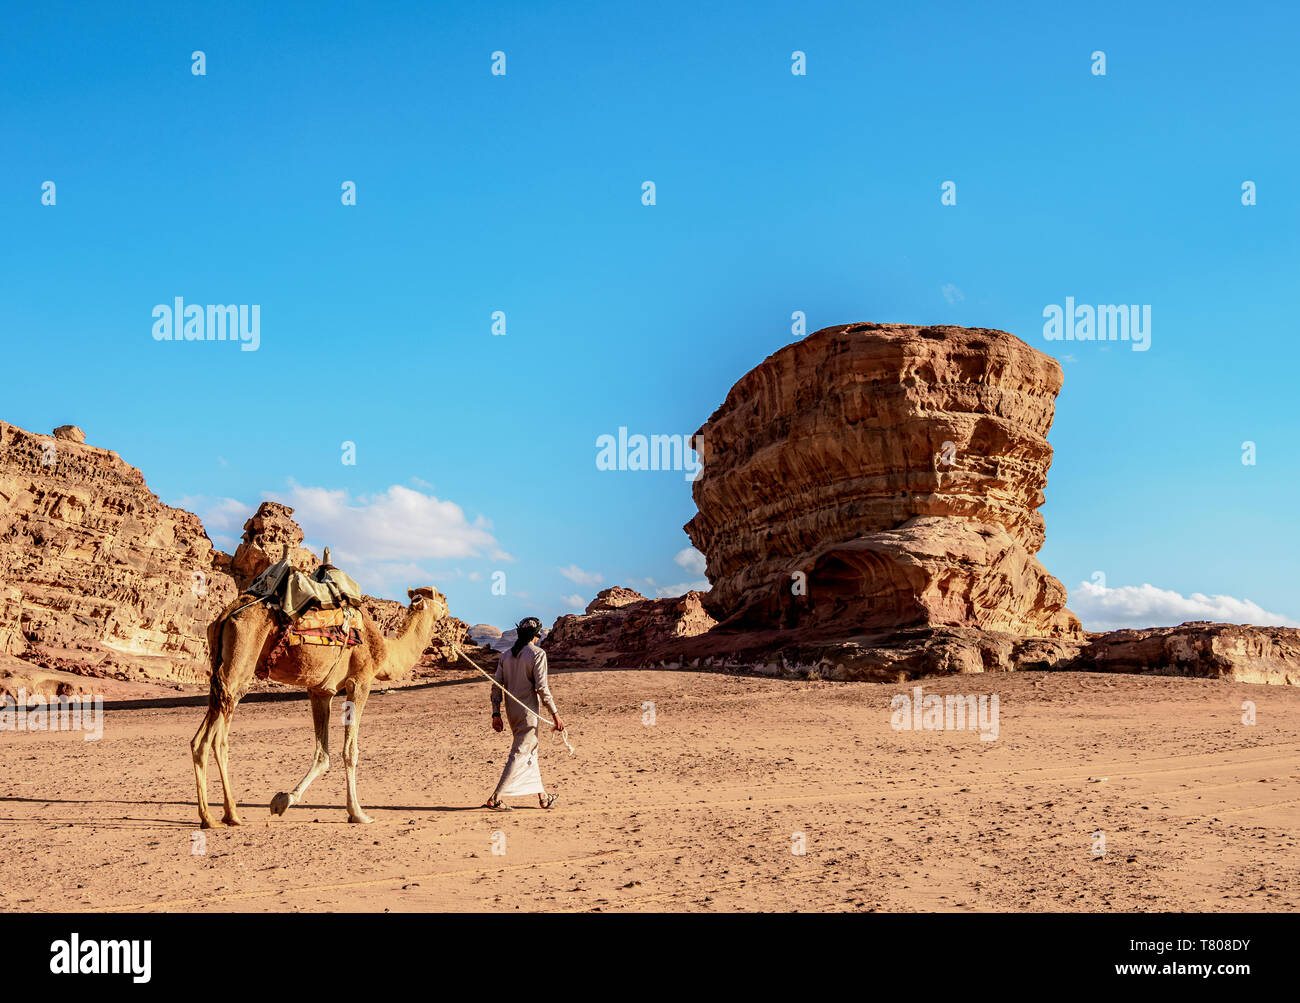 Bedouin walking with his camel, Wadi Rum, Aqaba Governorate, Jordan, Middle East Stock Photo